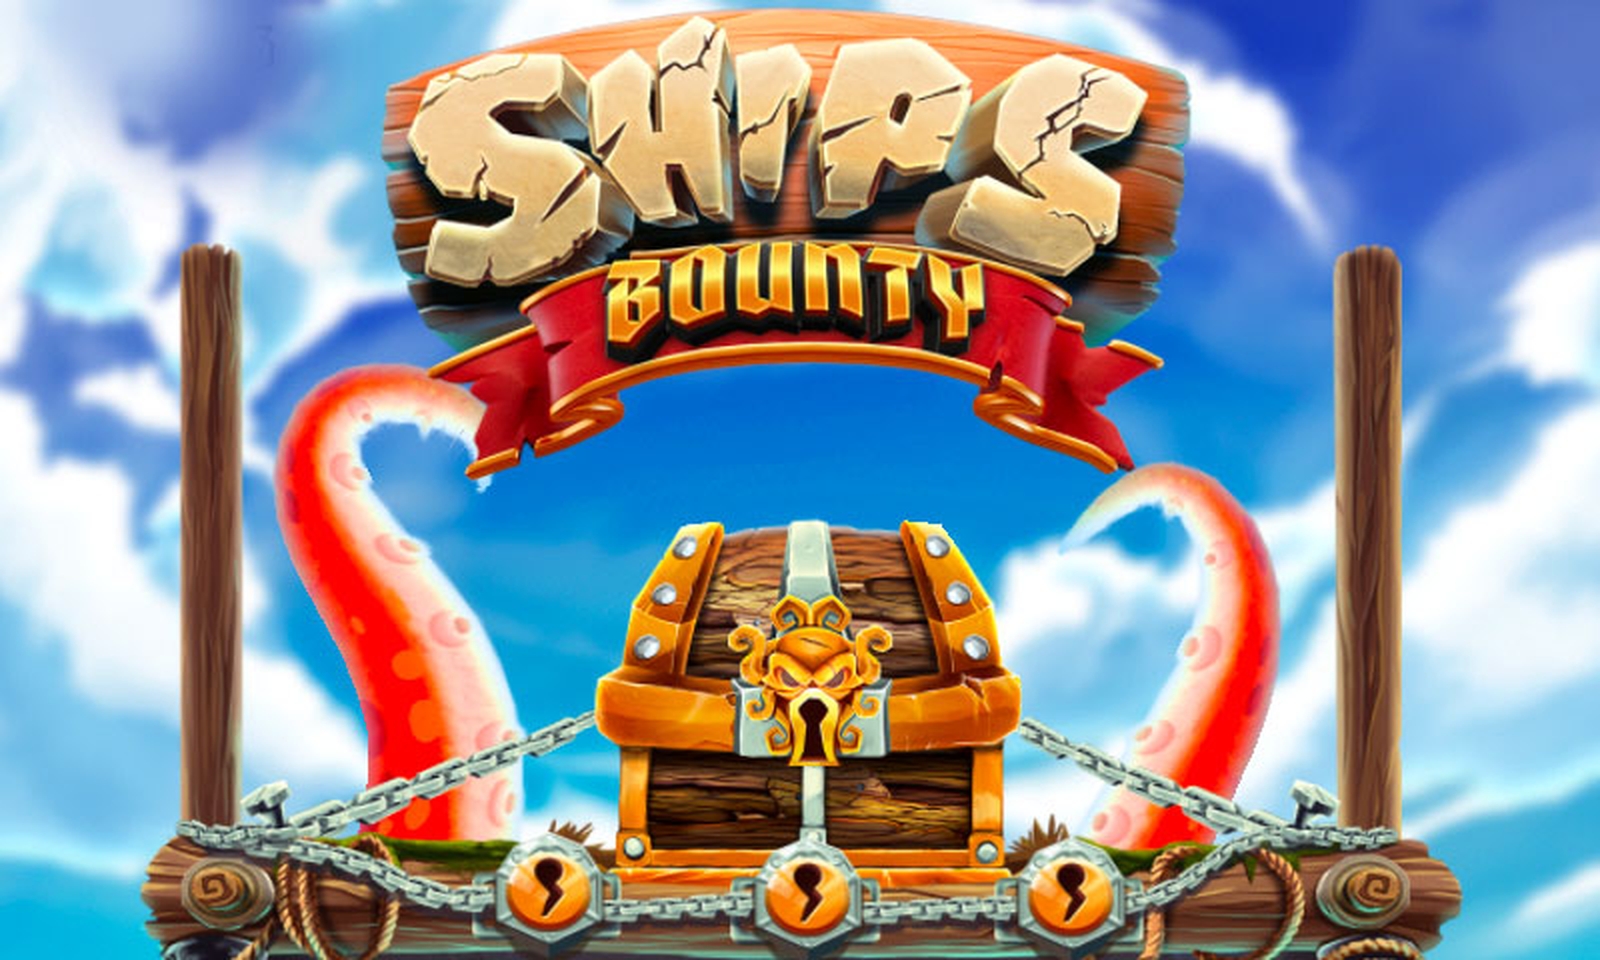 The Ships Bounty Online Slot Demo Game by Live 5 Gaming